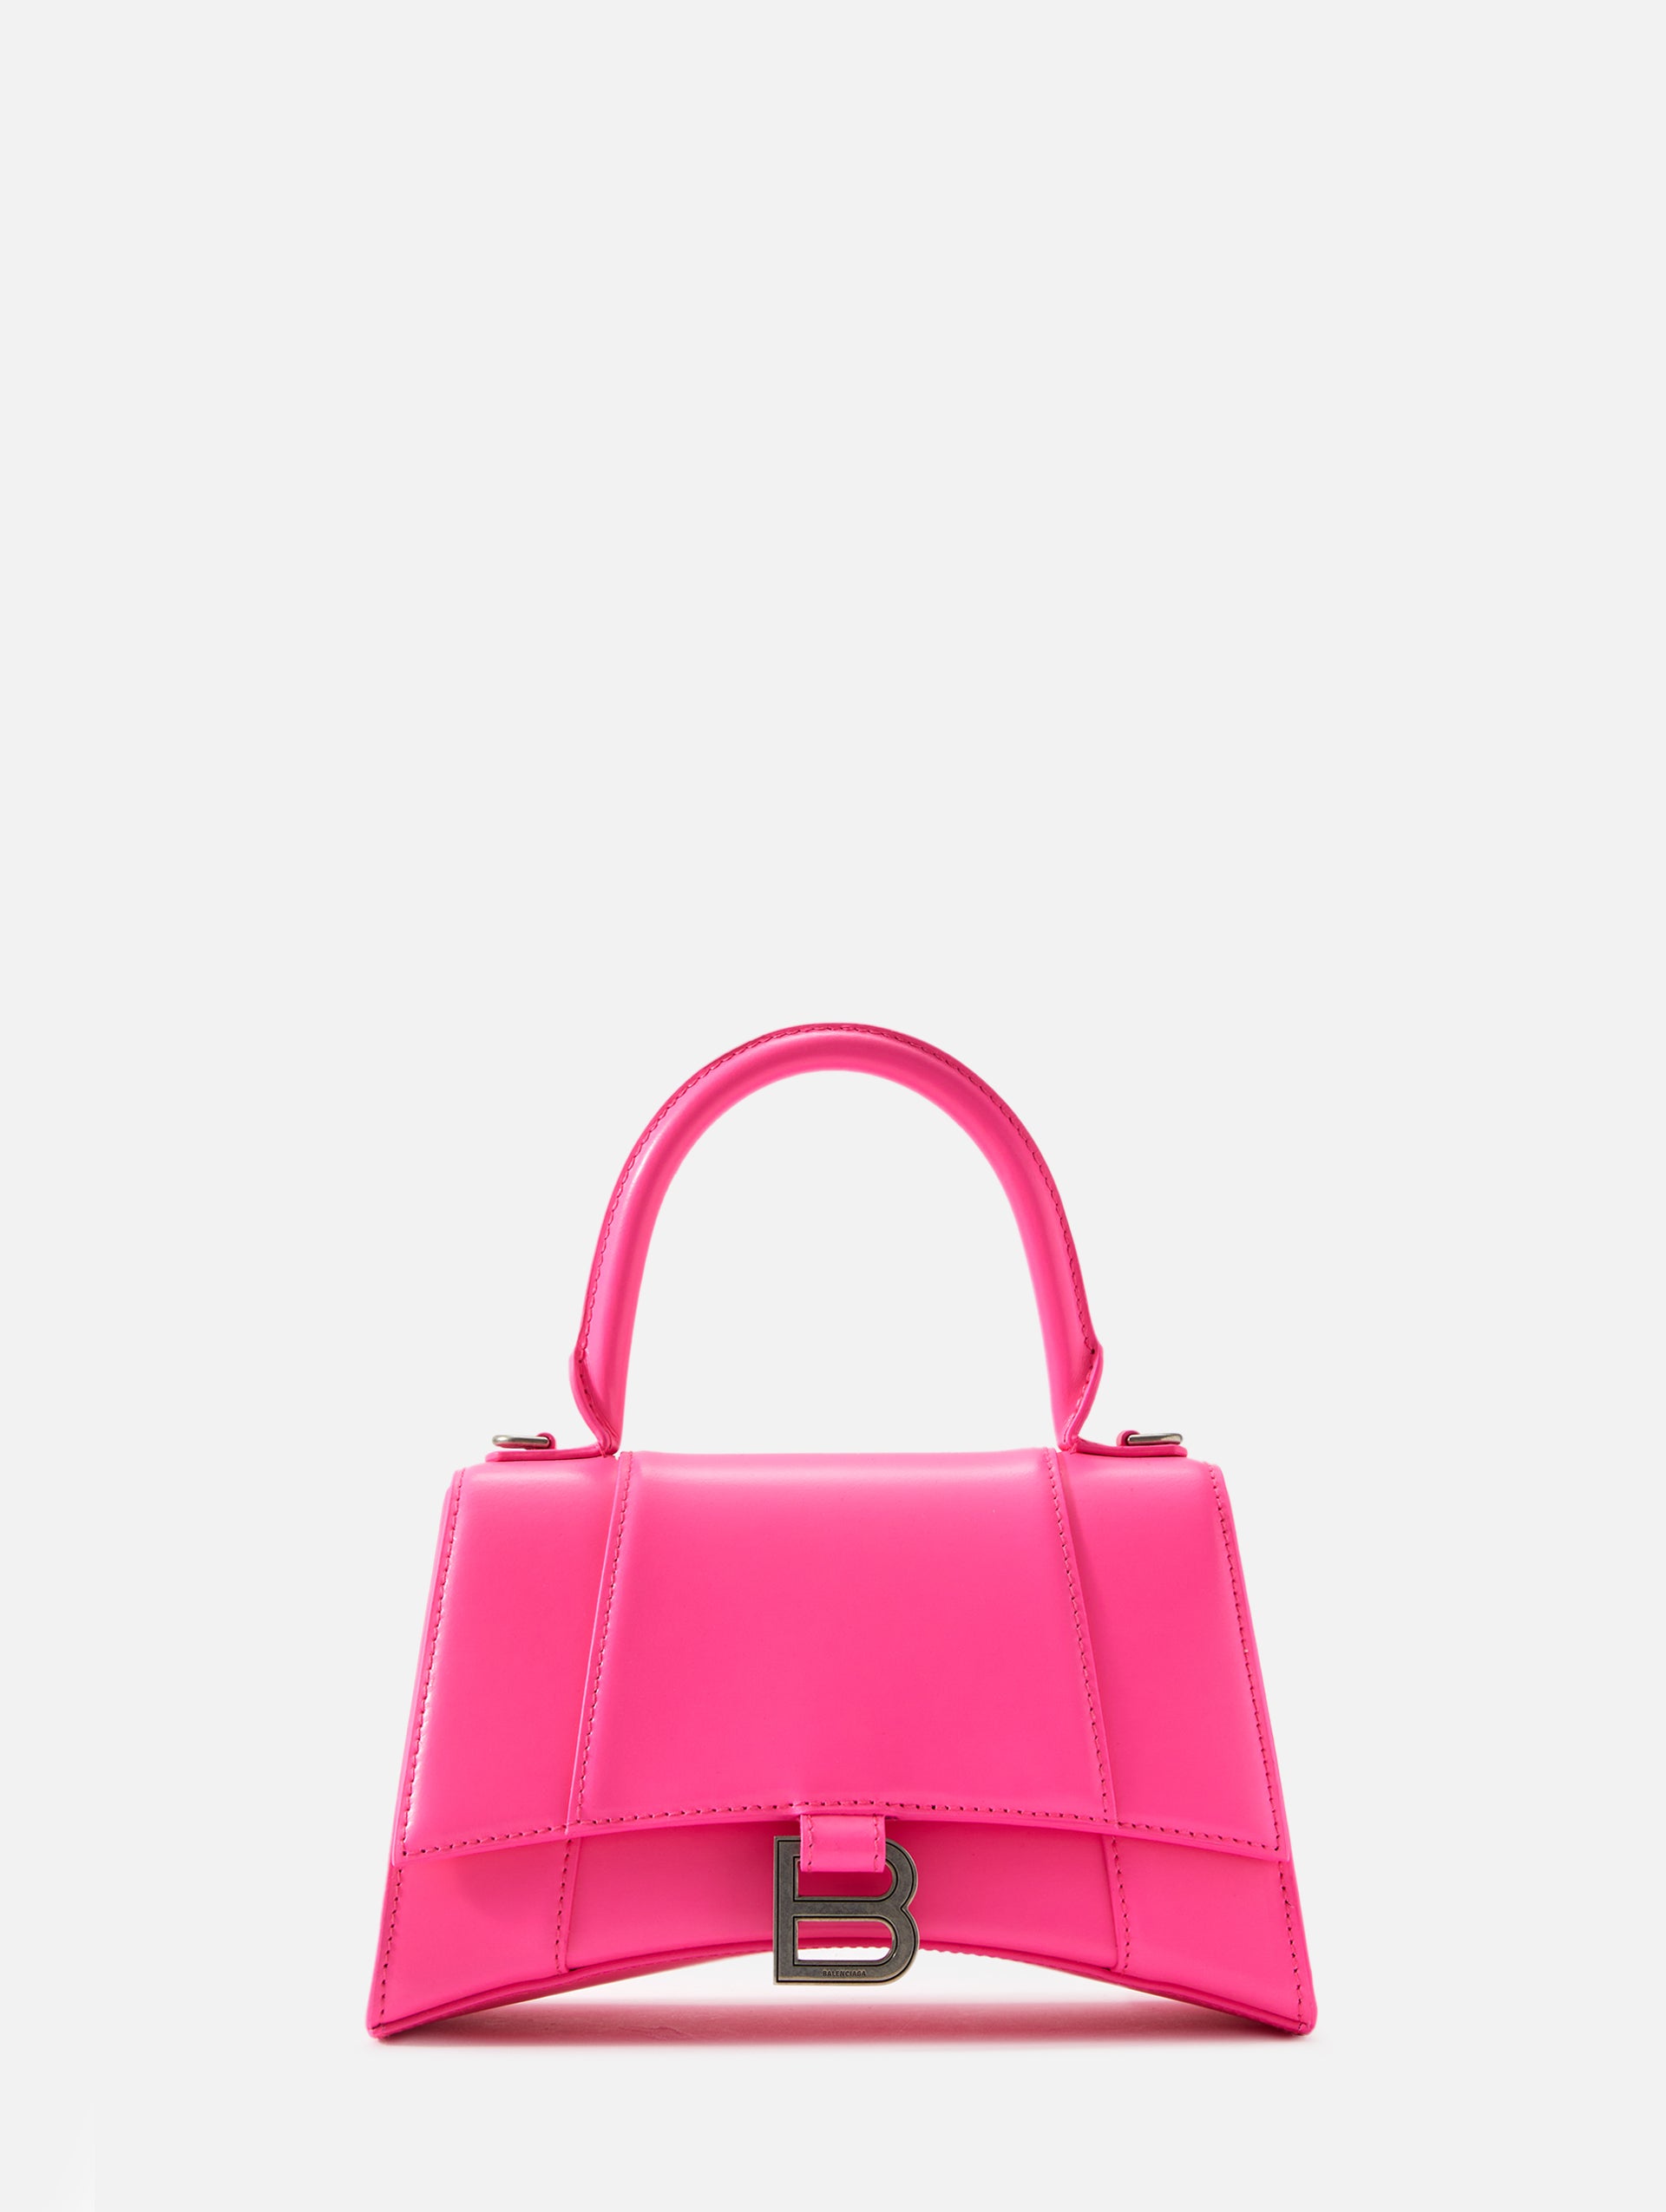 Balenciaga Hourglass Small Hand Bag in Pink 100 Authentic  eBay